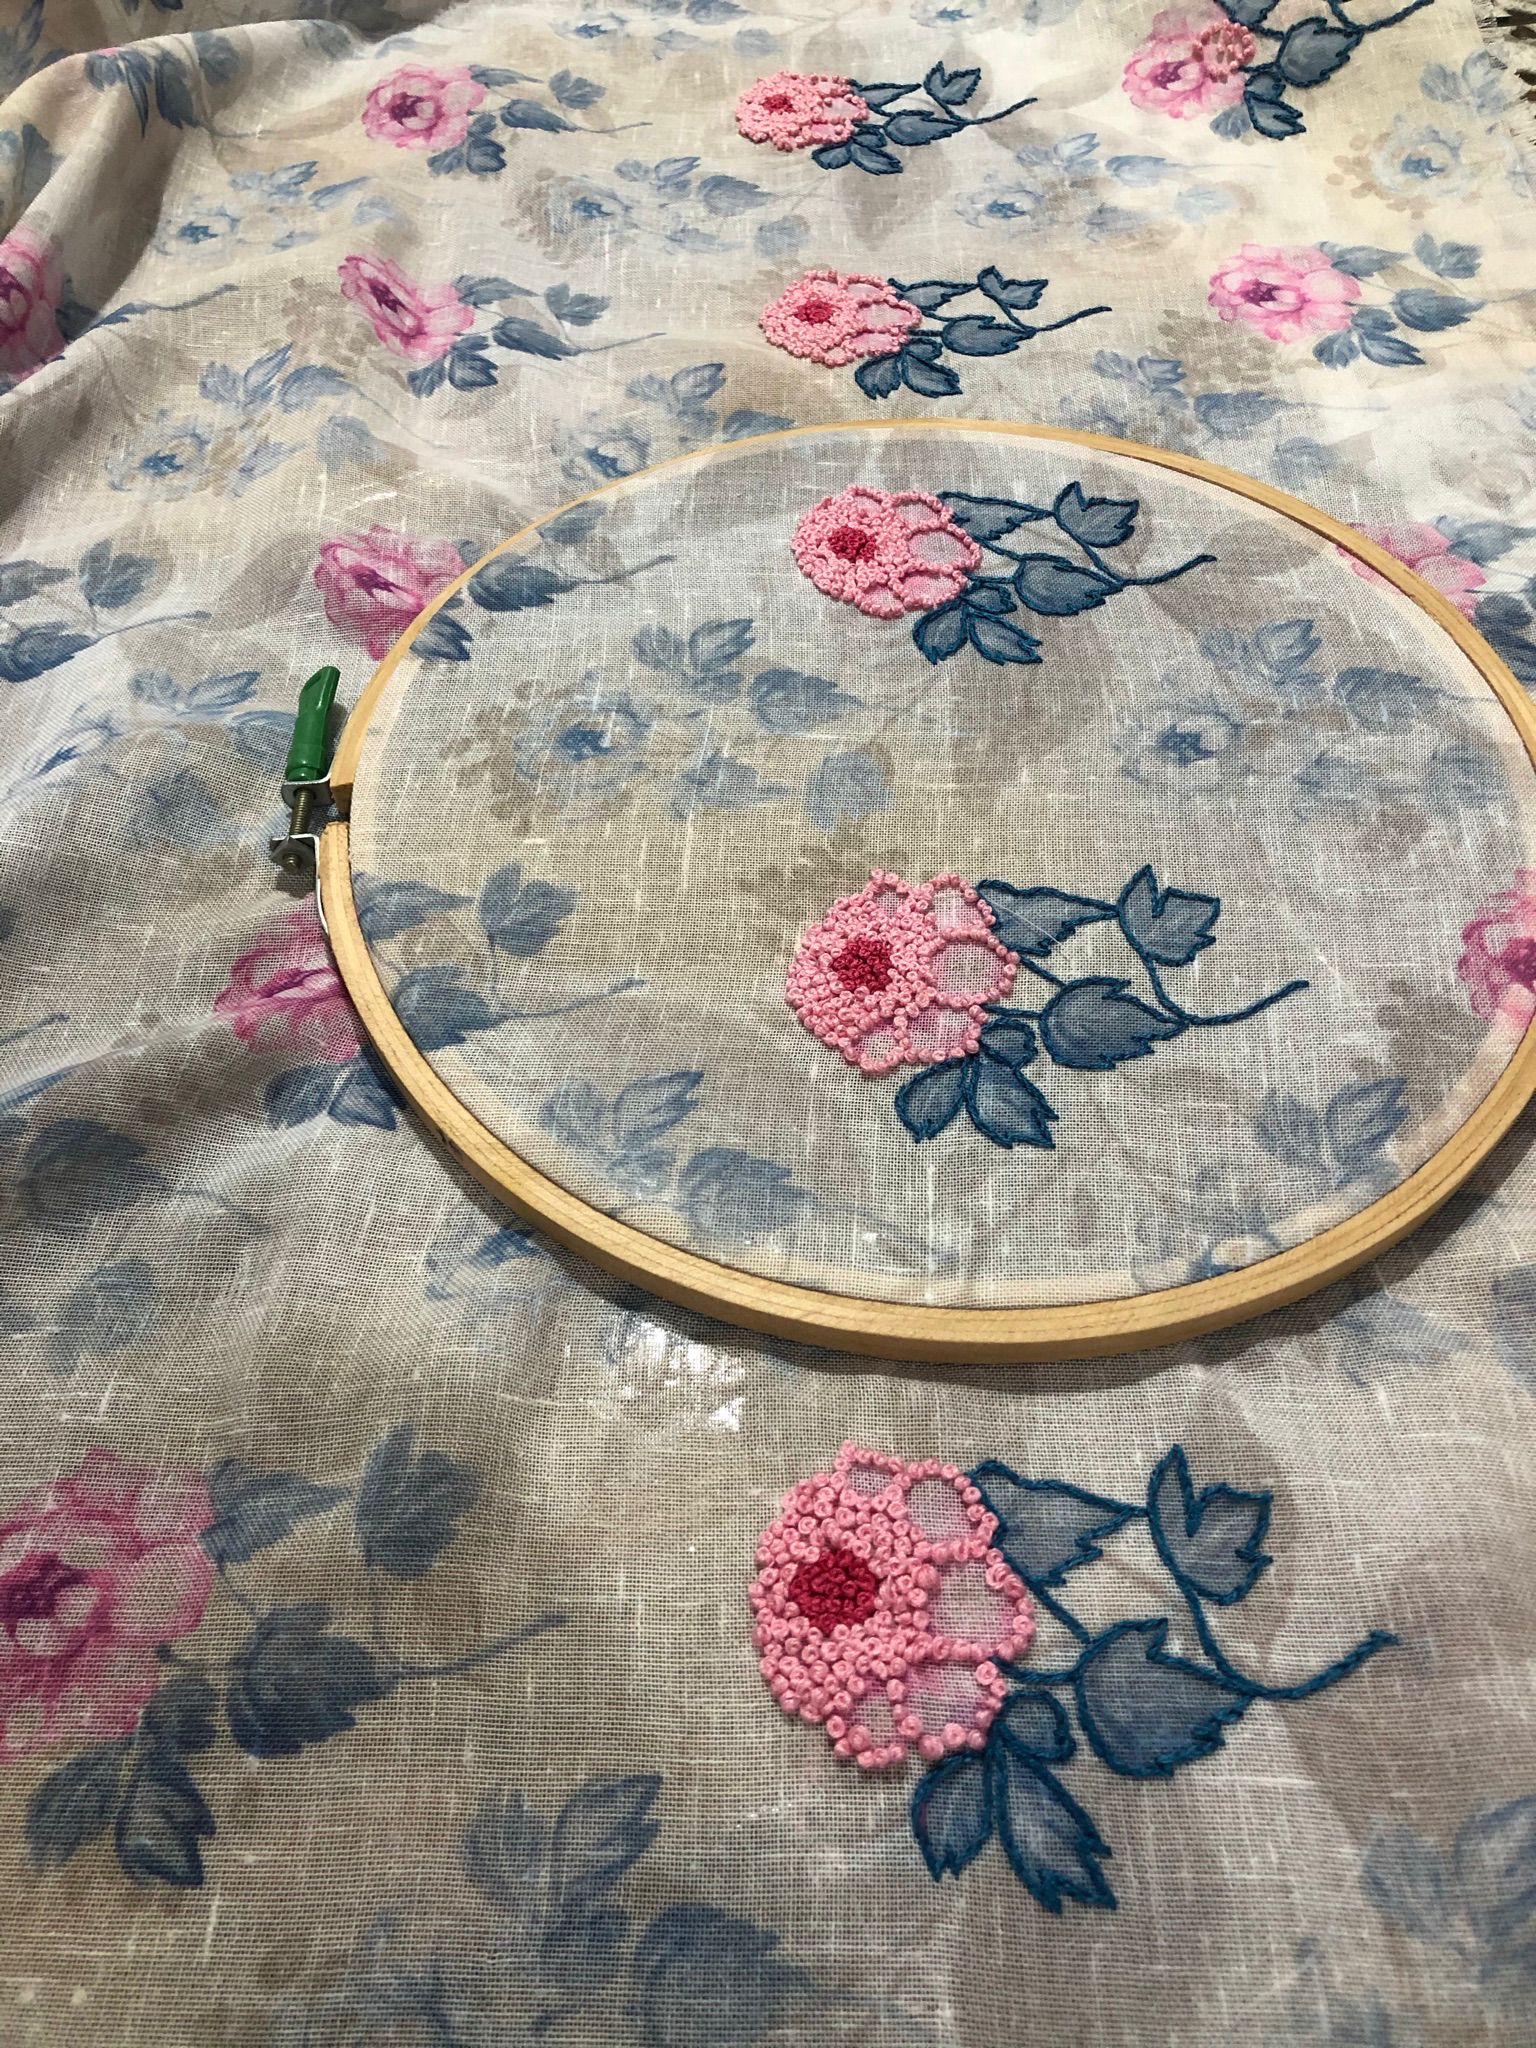 I made this one with the help of French knots and Chain stitches.